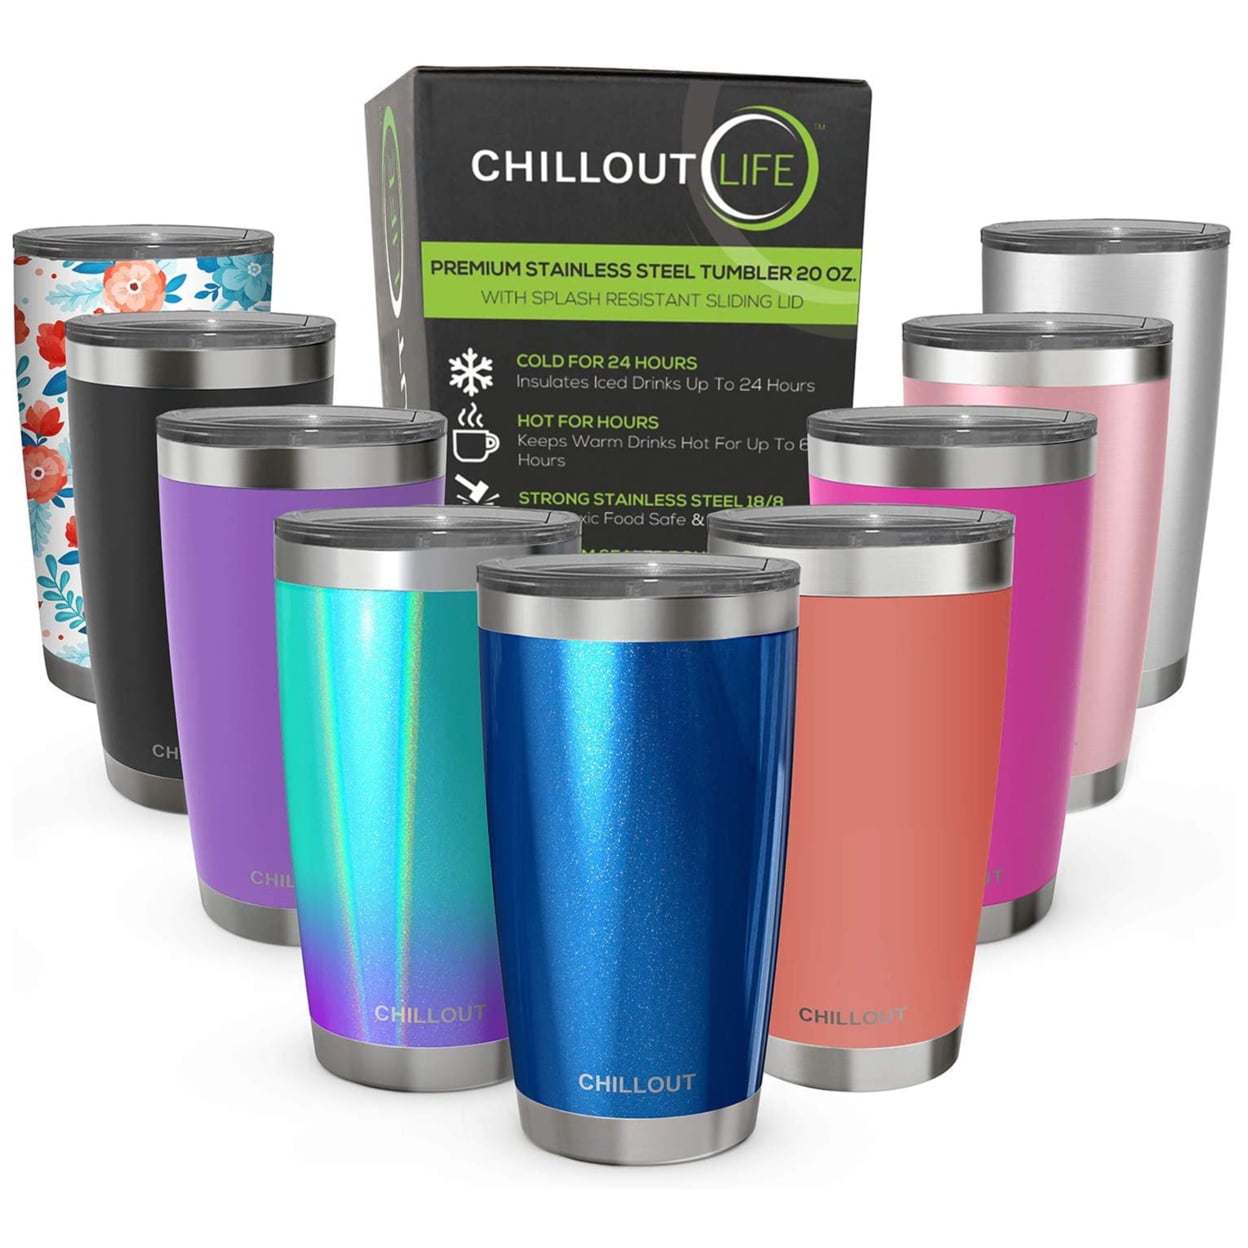 Stainless Steel Tumbler with Handle - Cherry Red by Chillout Life for  Unisex - 6 x 30 oz Tumbler 